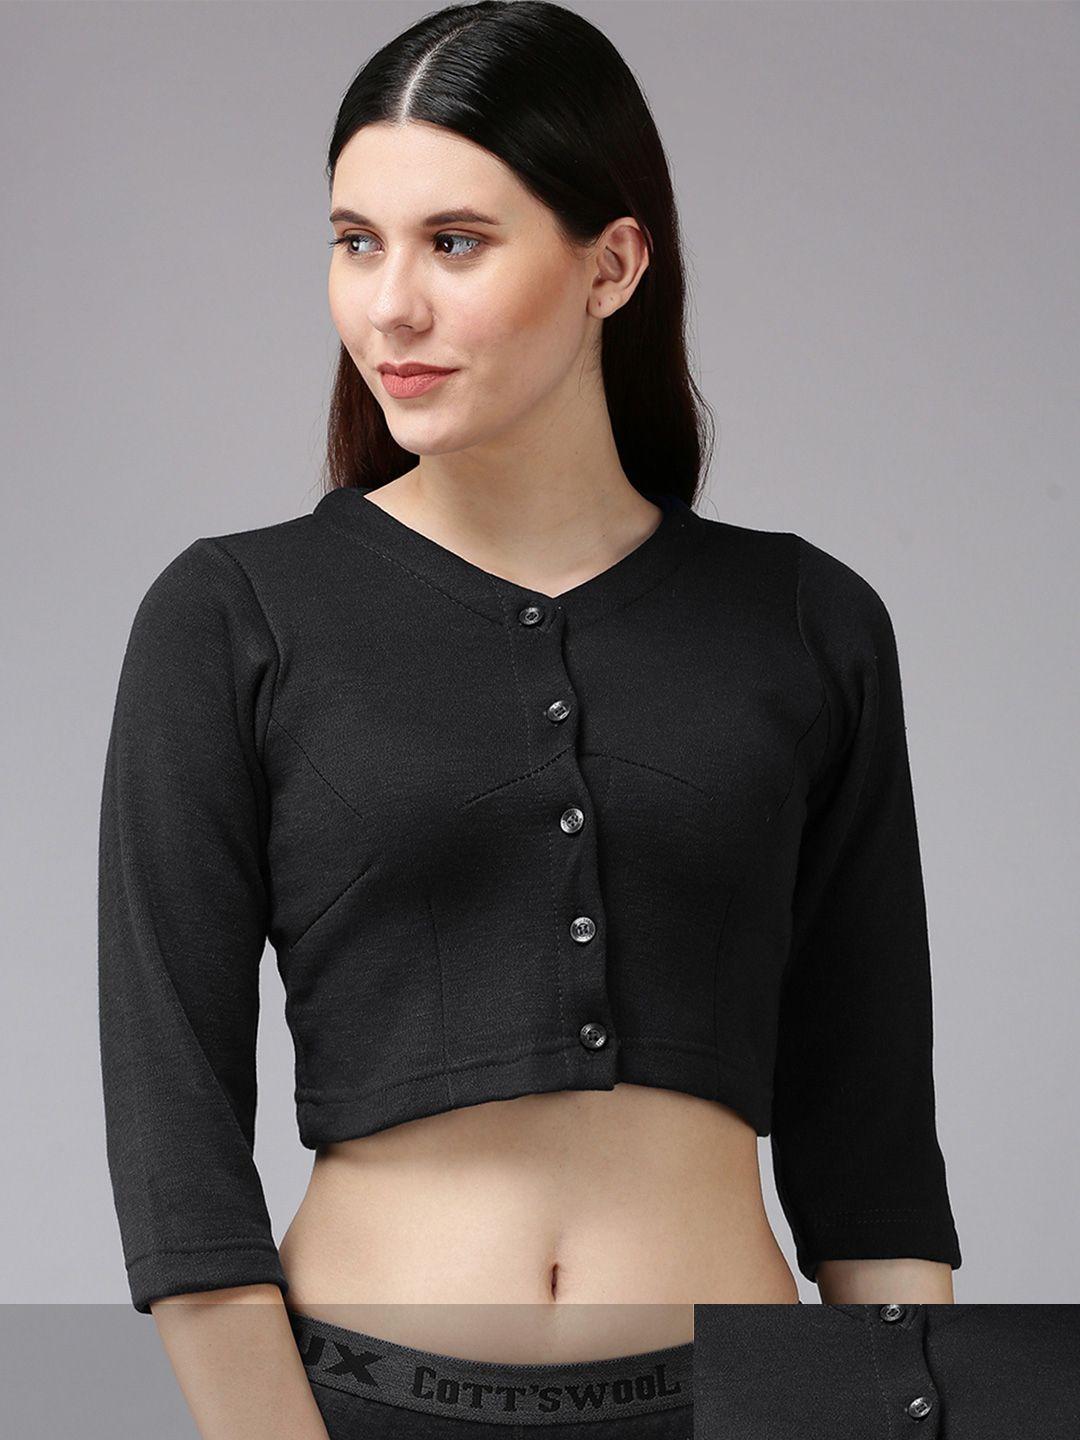 lux-cottswool-women-pack-of-2-black-solid-slim-fit-cotton-thermal-top